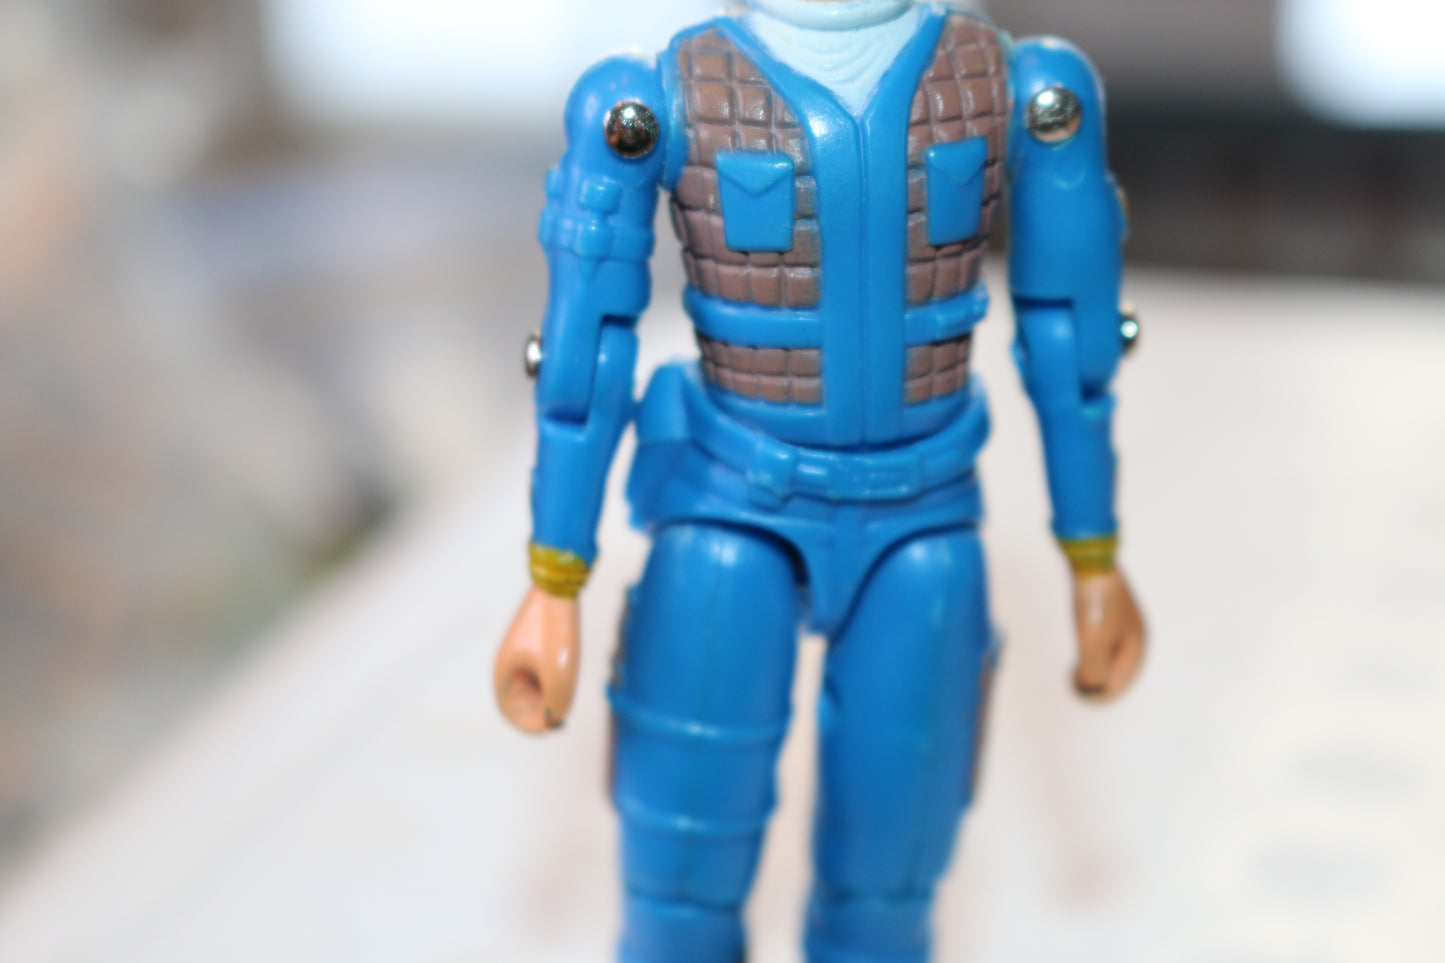 1983 Galoob Cannell A-Team John "Hannibal" Smith 3.75" Vintage Action Figure